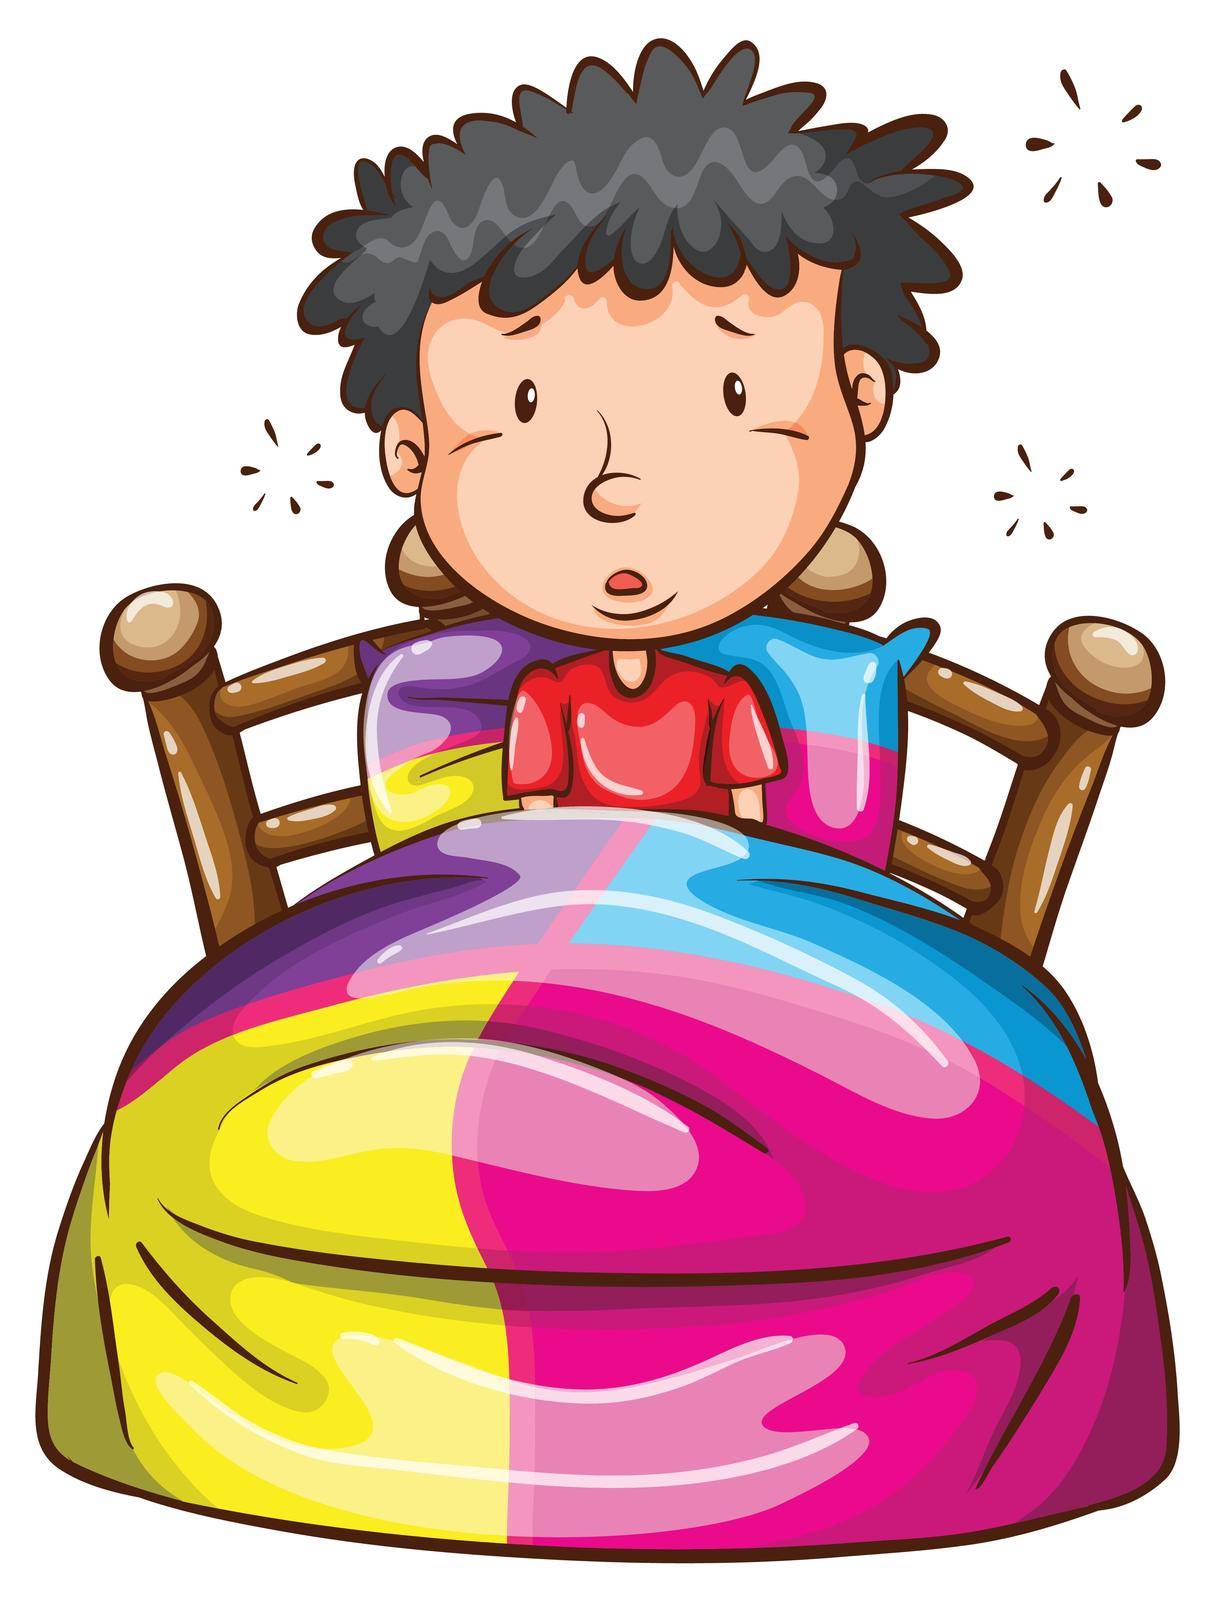 Illustration of a boy at the bed on a white background